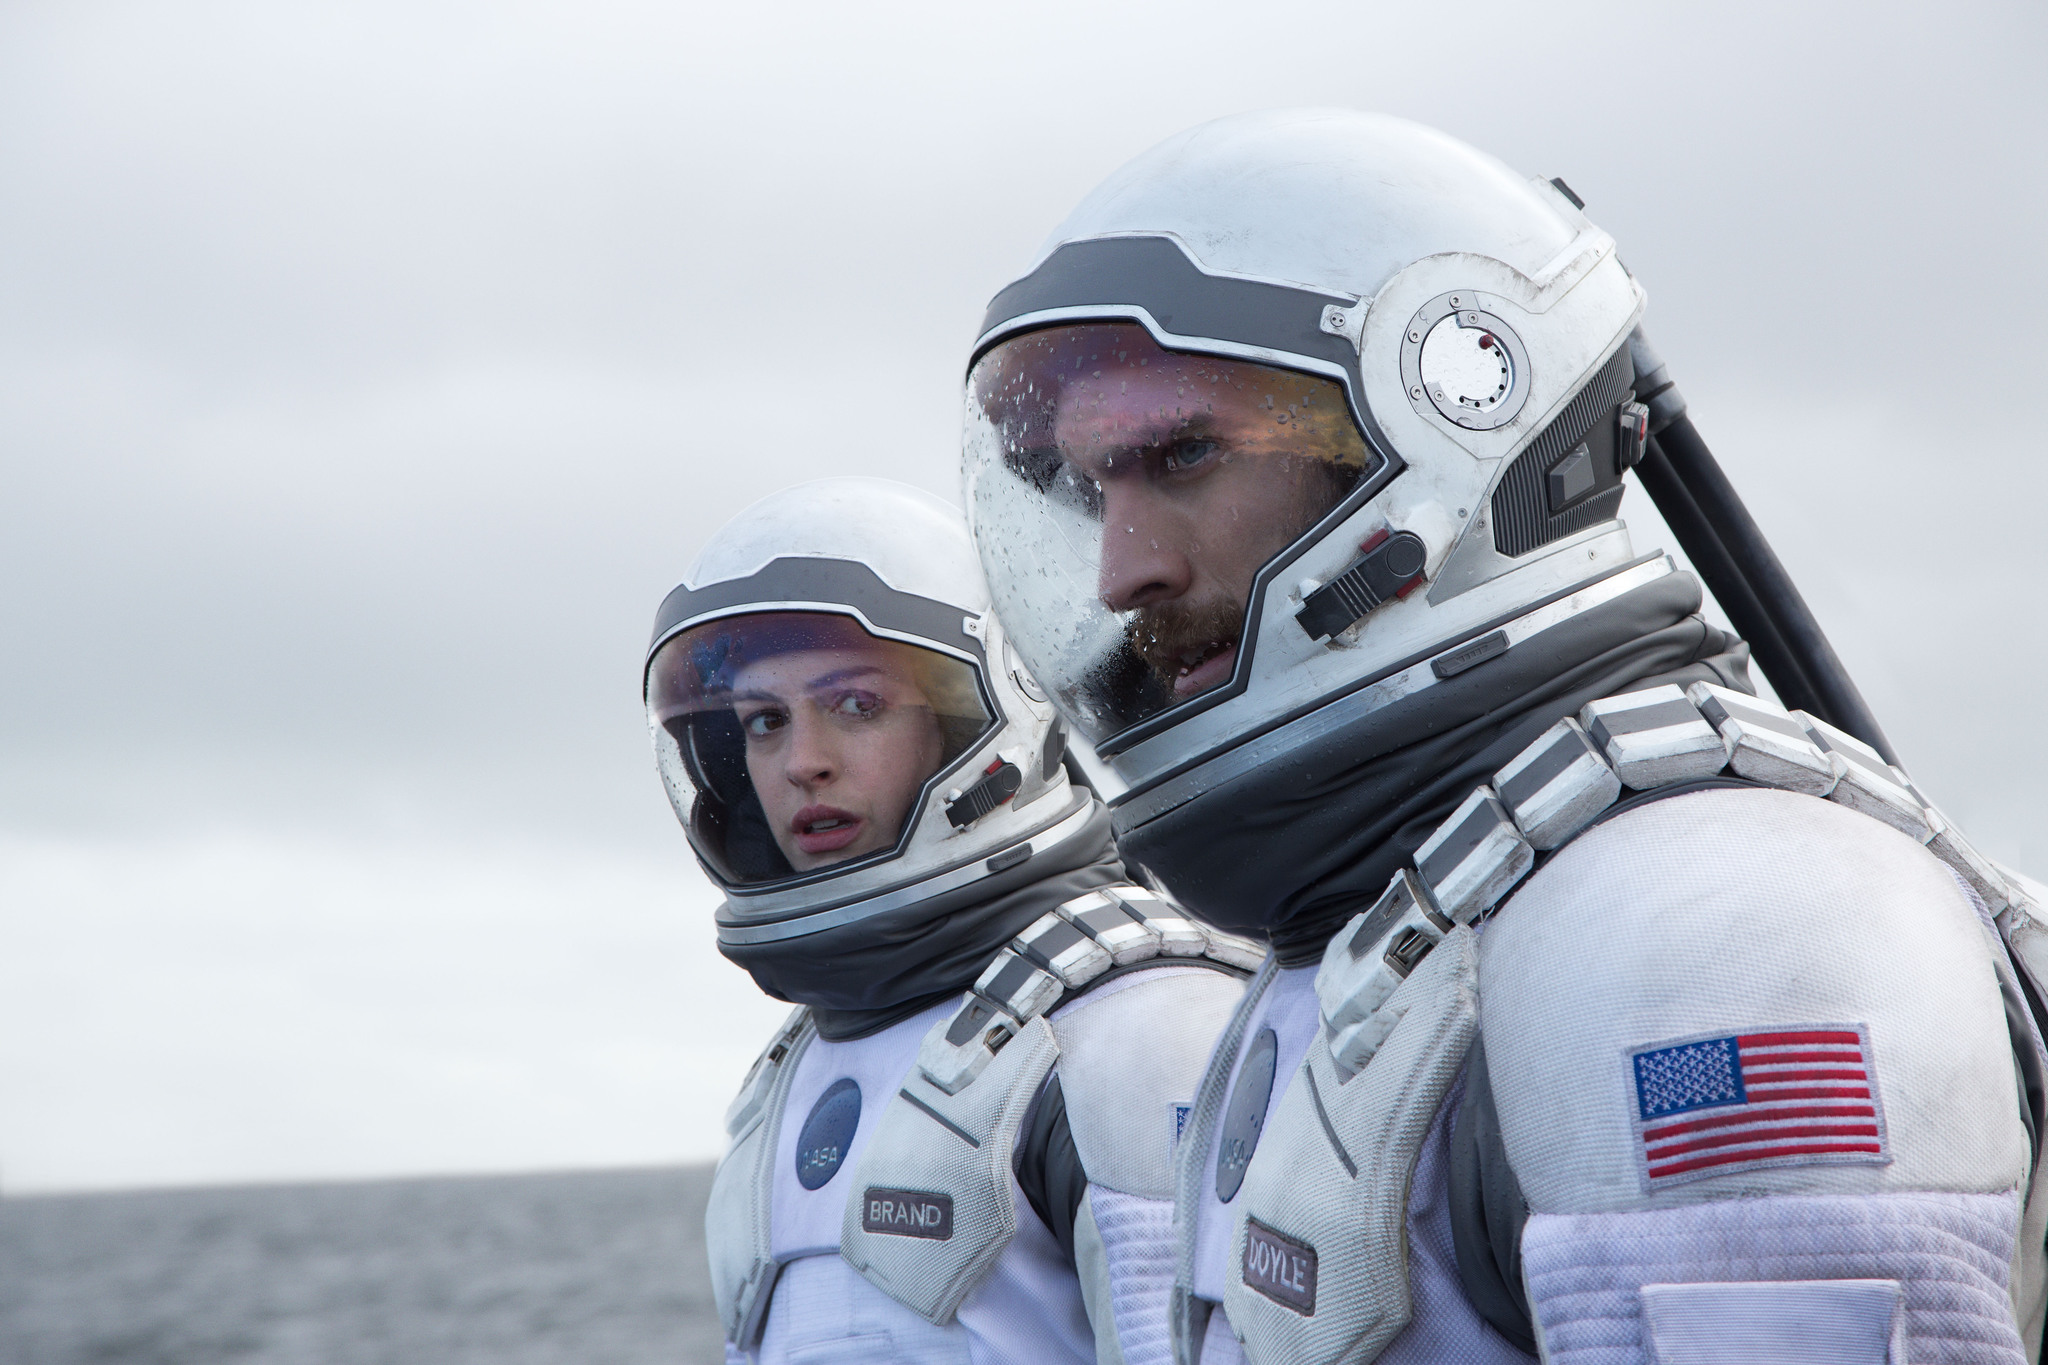 Interstellar Ending Explained What Happens at the end of Interstellar